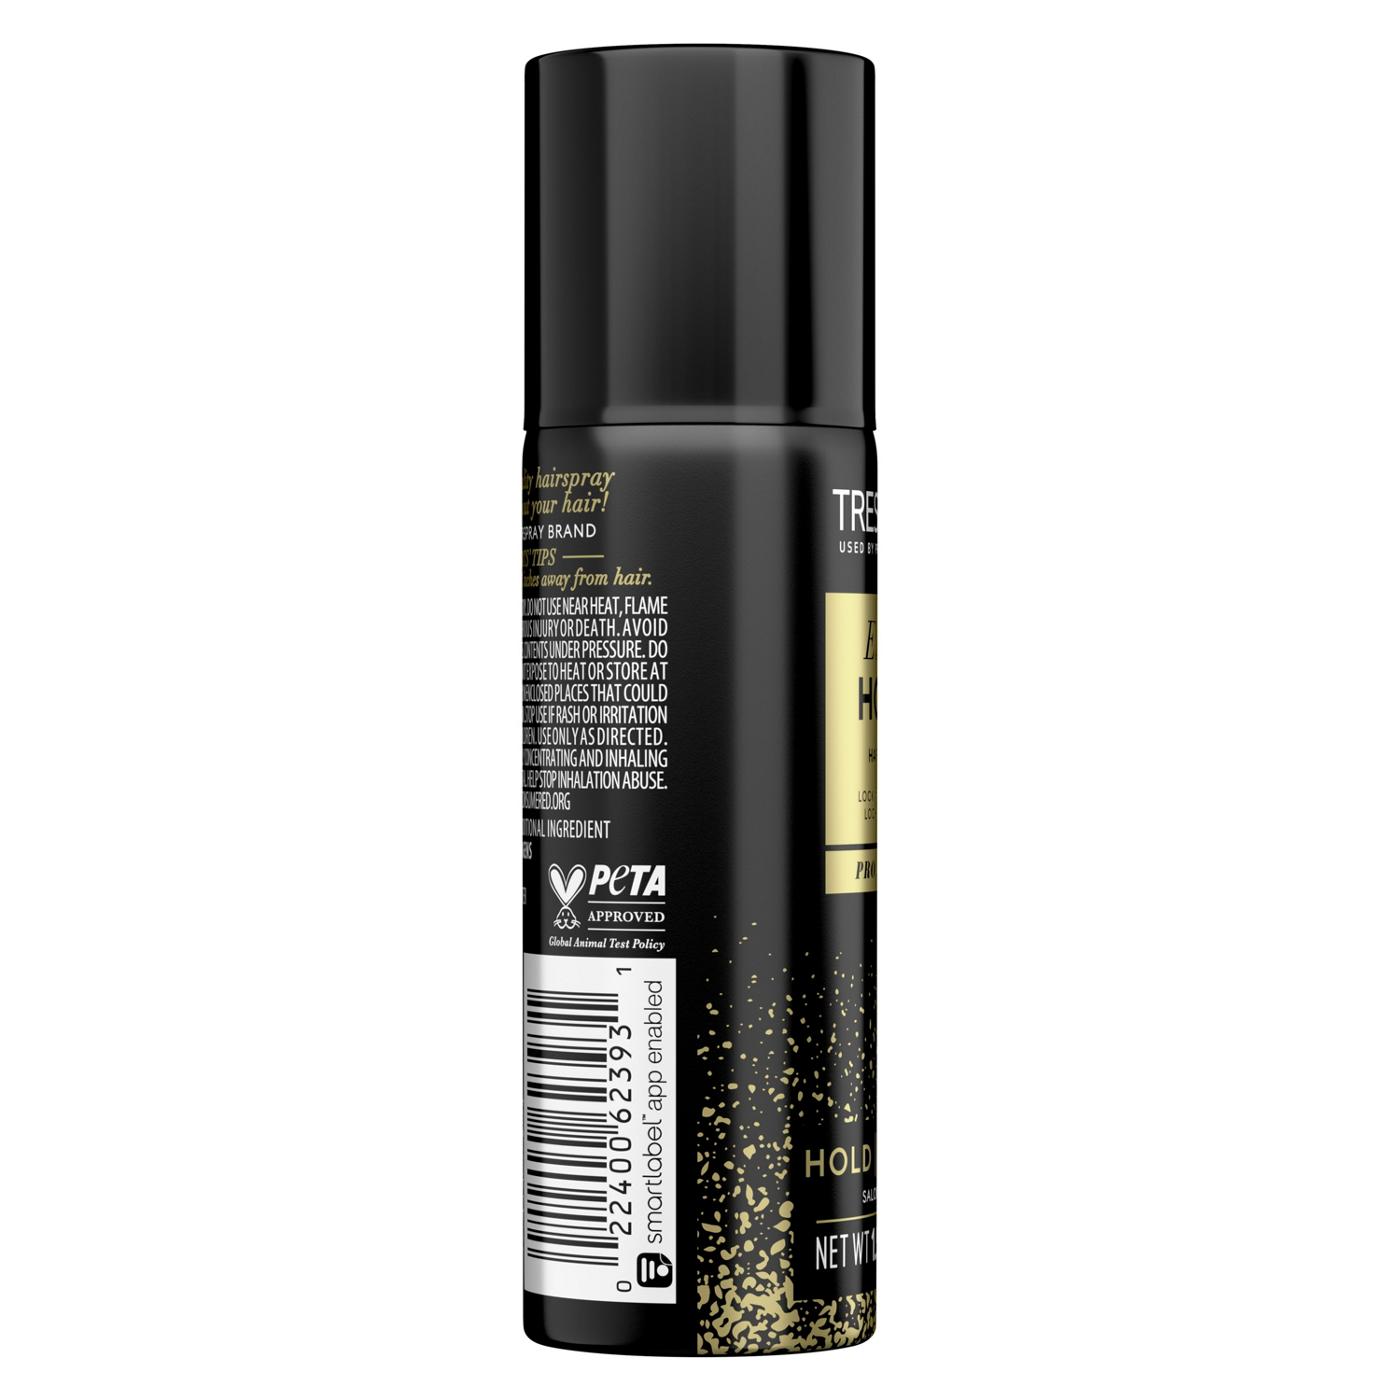 TRESemmé Travel Size TRES Two Extra Hold Hair Spray; image 2 of 7